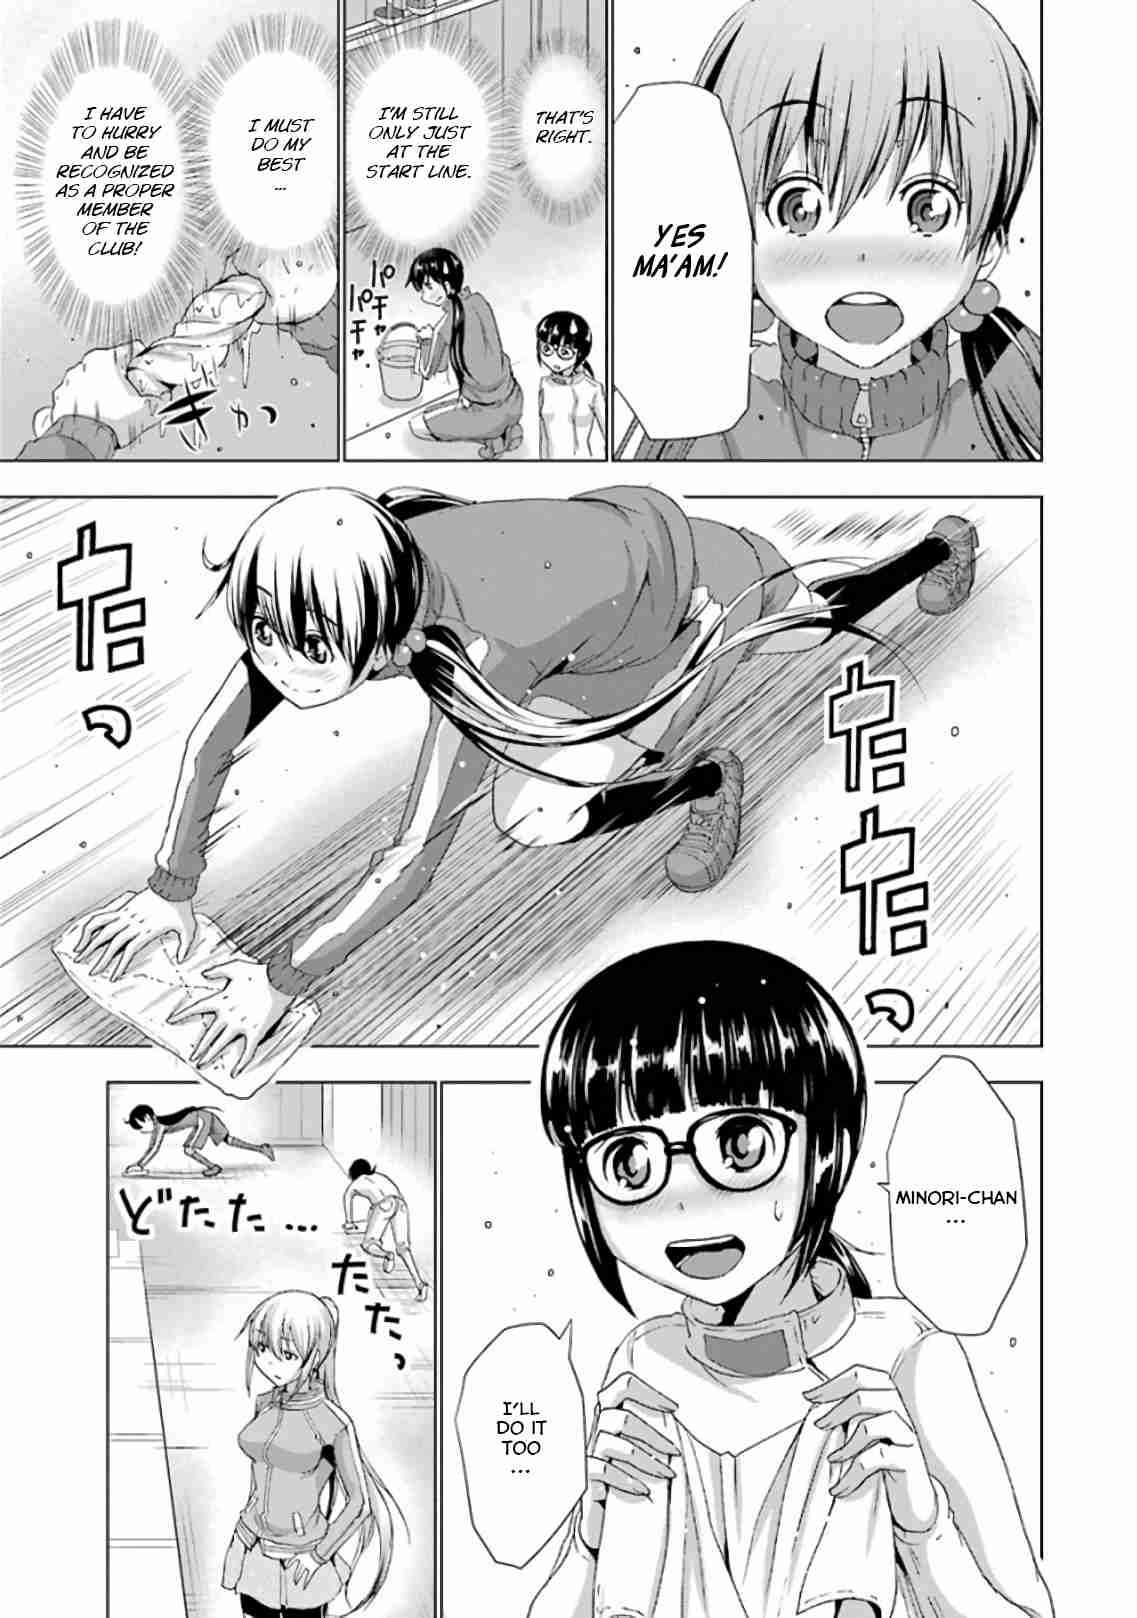 Duel! Vol. 1 Ch. 4 Painful youth